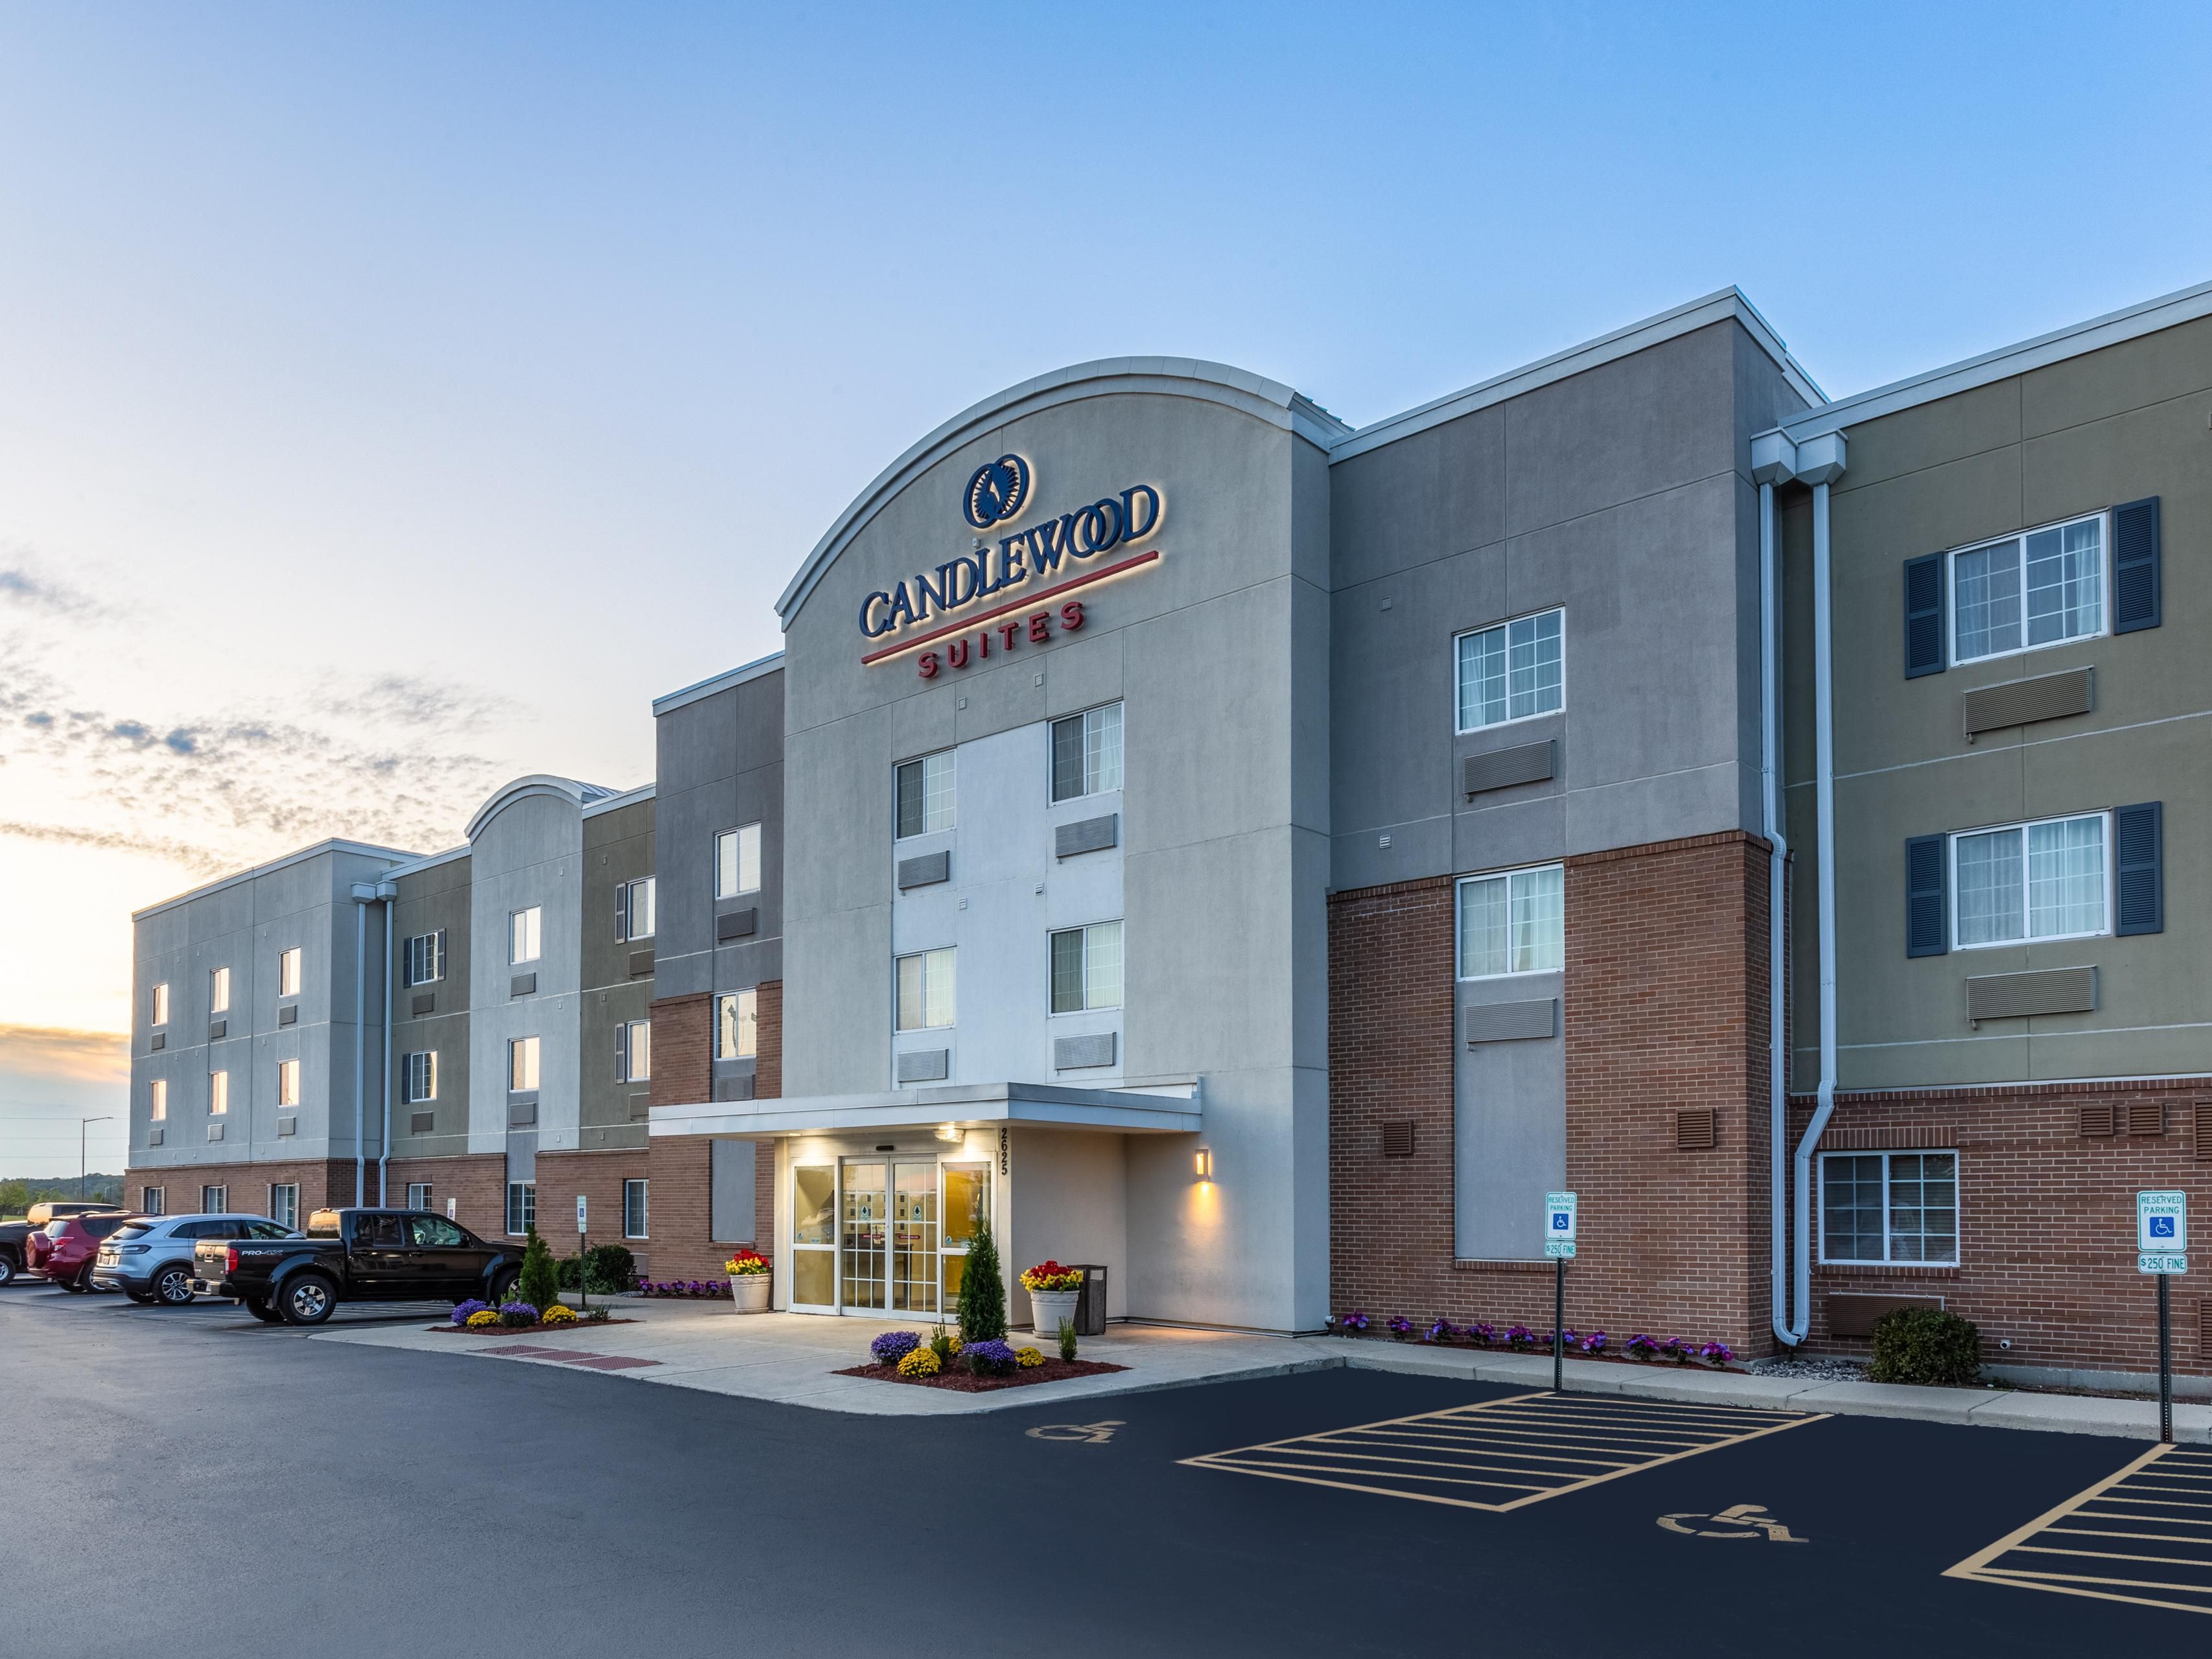 Extended Stay Hotel in Aurora, IL  Candlewood Suites Aurora-Naperville